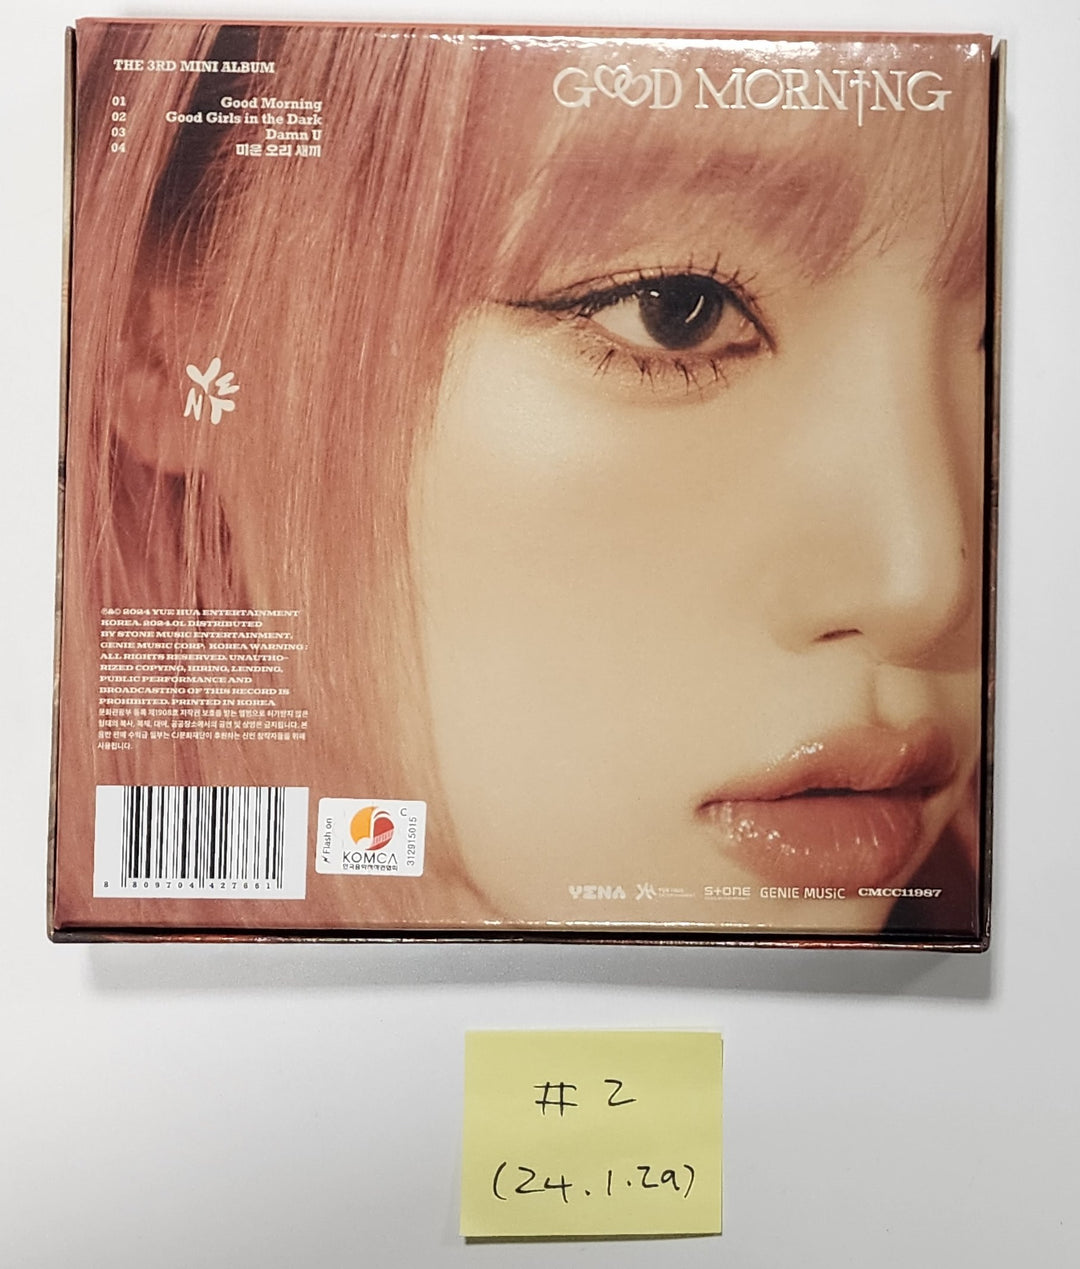 Yena "Good Morning" 3rd Mini - Hand Autographed(Signed) Album [24.1.29]